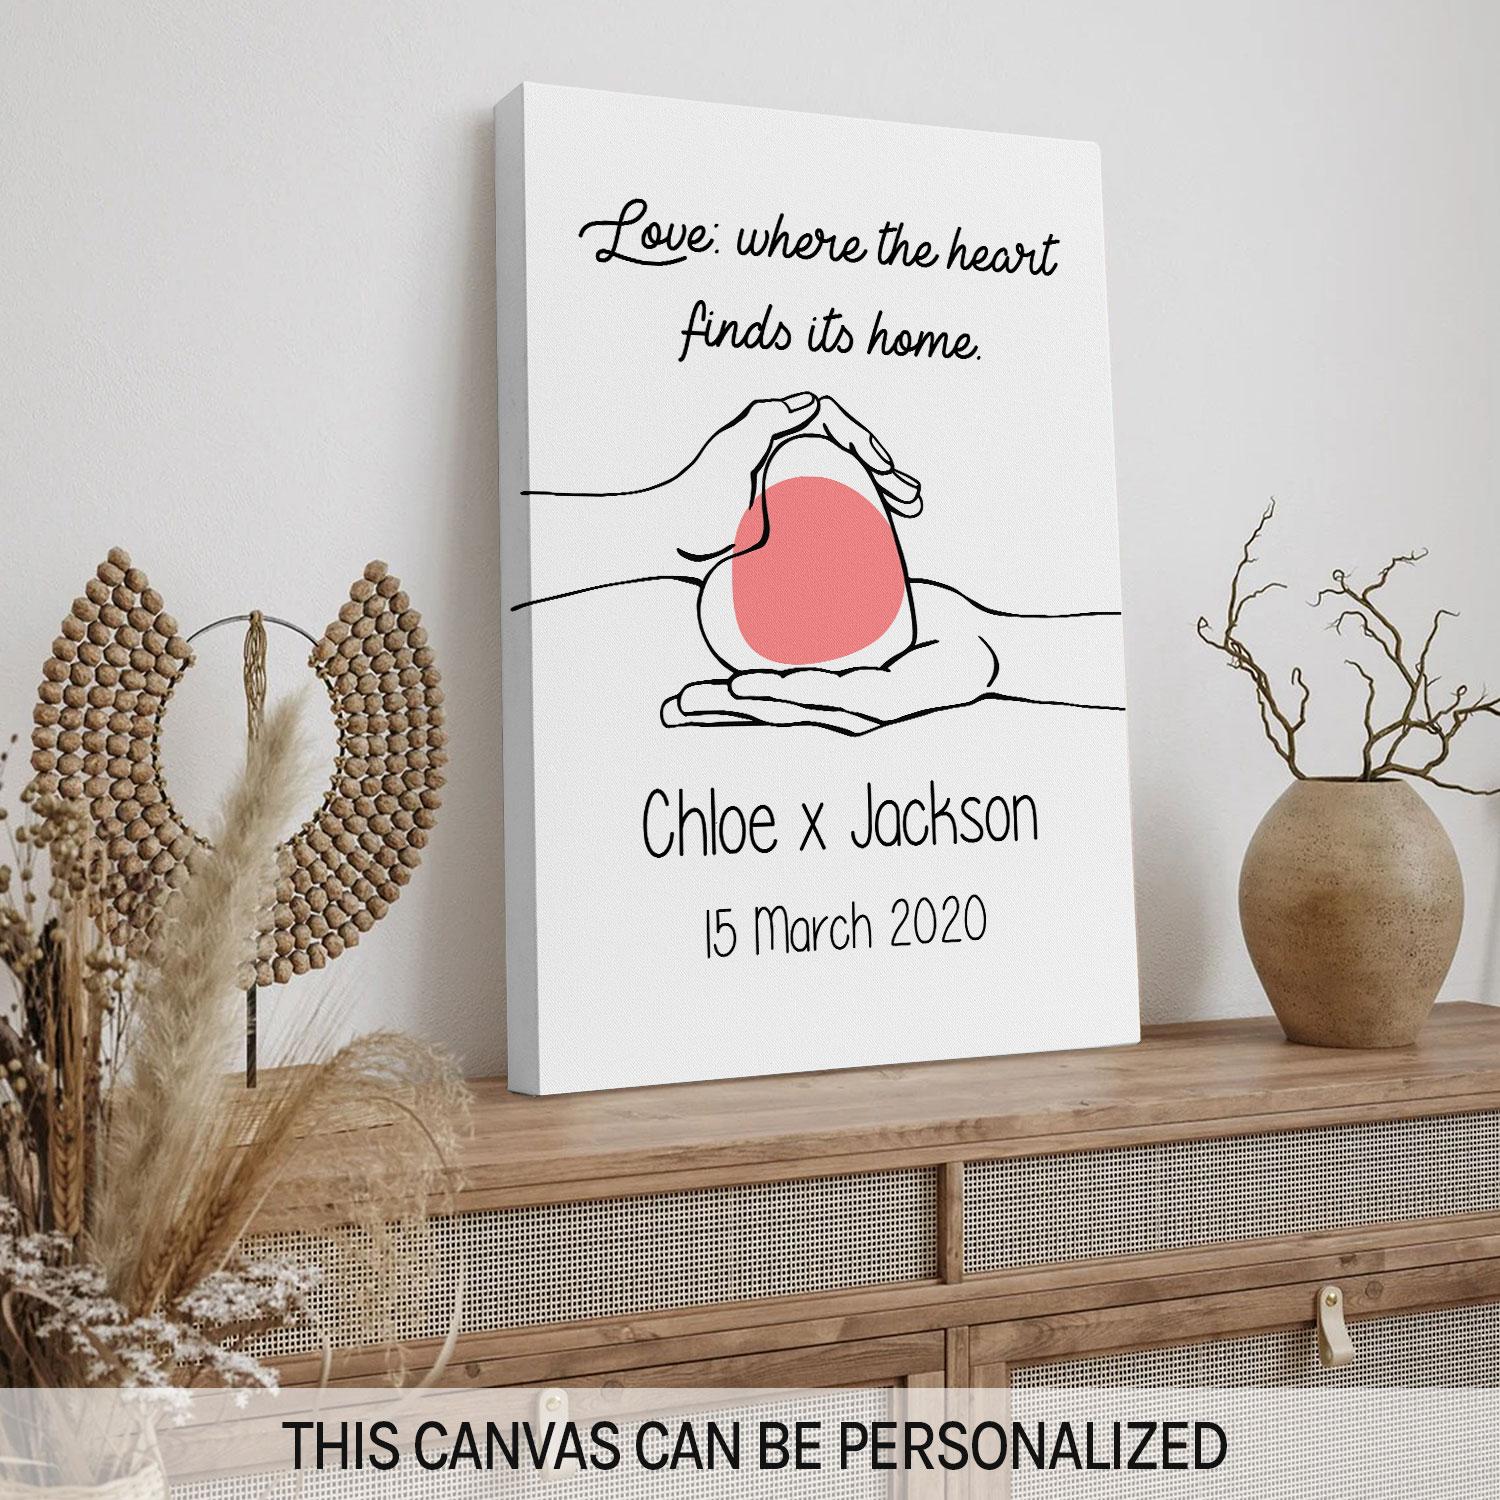 Love: Where The Heart Finds It Home - Personalized Anniversary, Valentine's Day, Birthday or Christmas gift For Him or Her - Custom Canvas Print - MyMindfulGifts